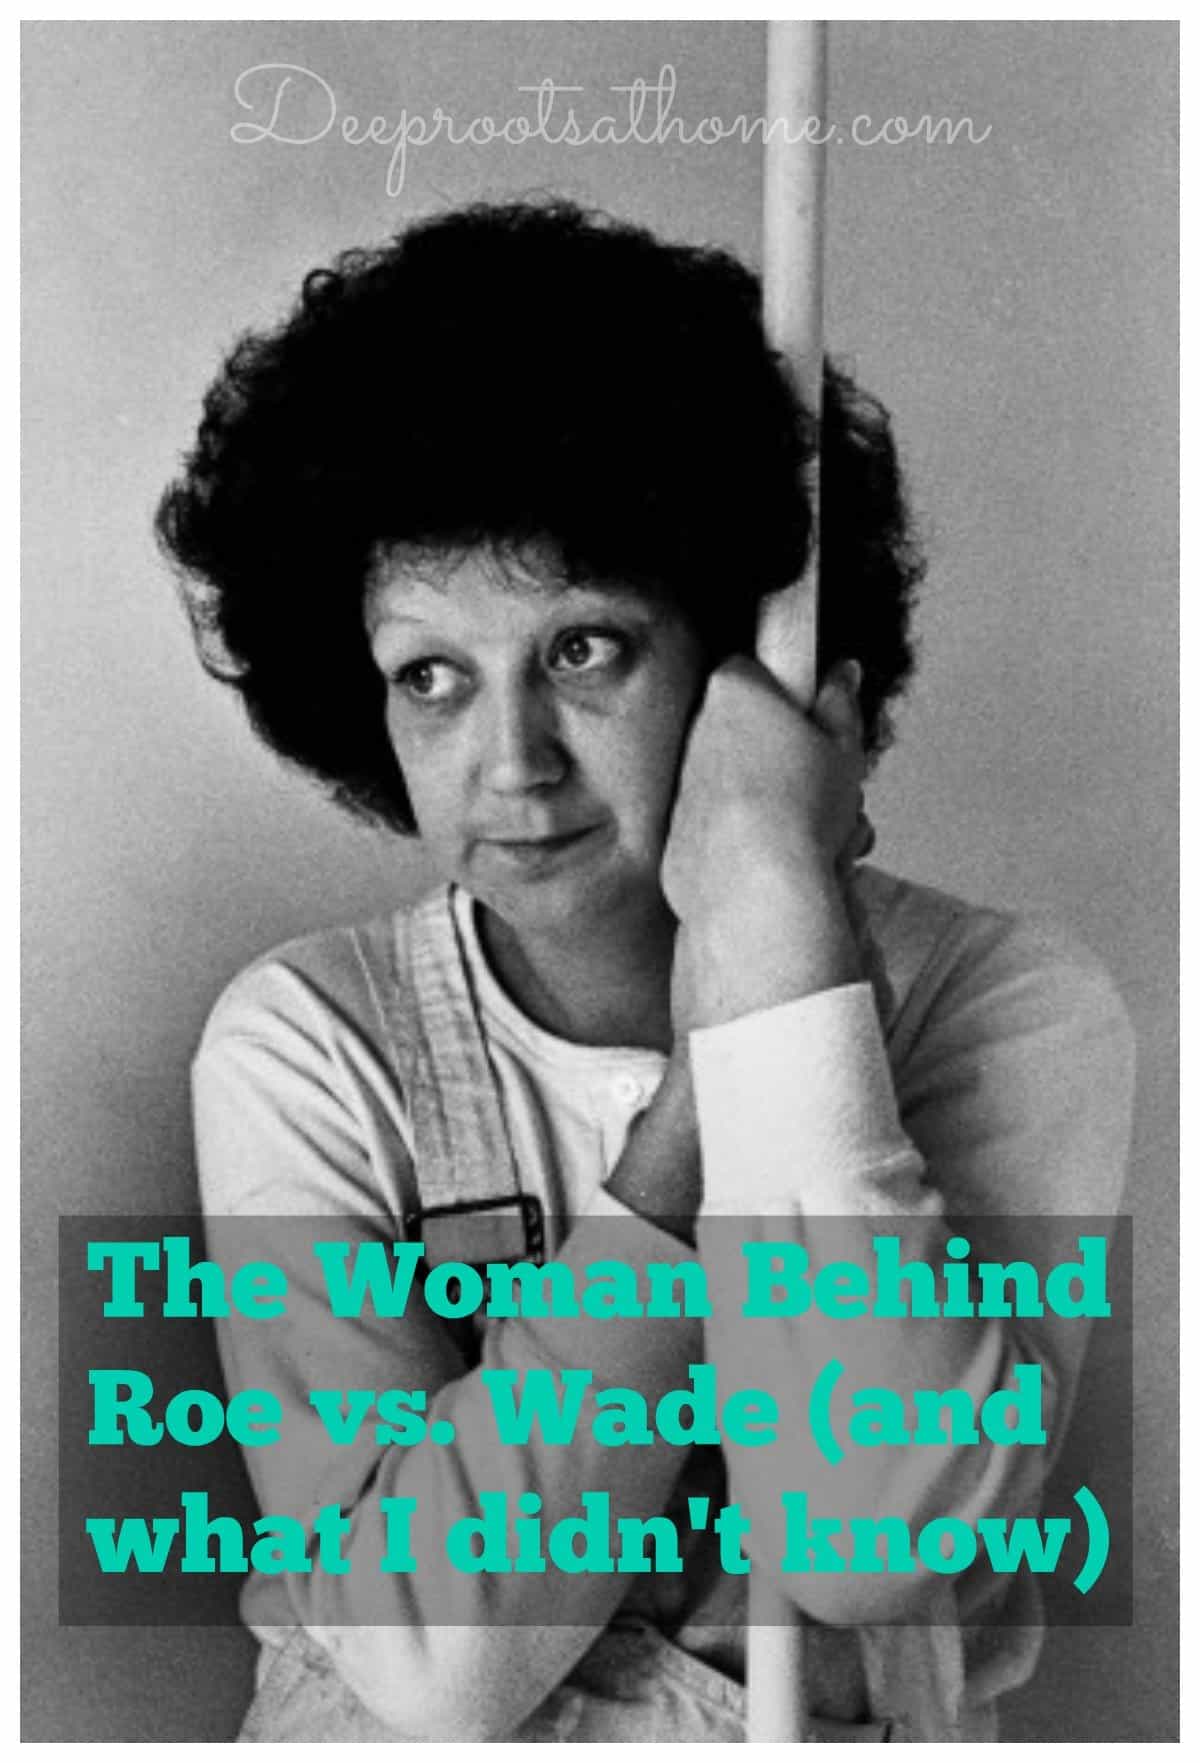 The Woman Behind Roe vs. Wade (and what I didn't know), Norma McCorvey